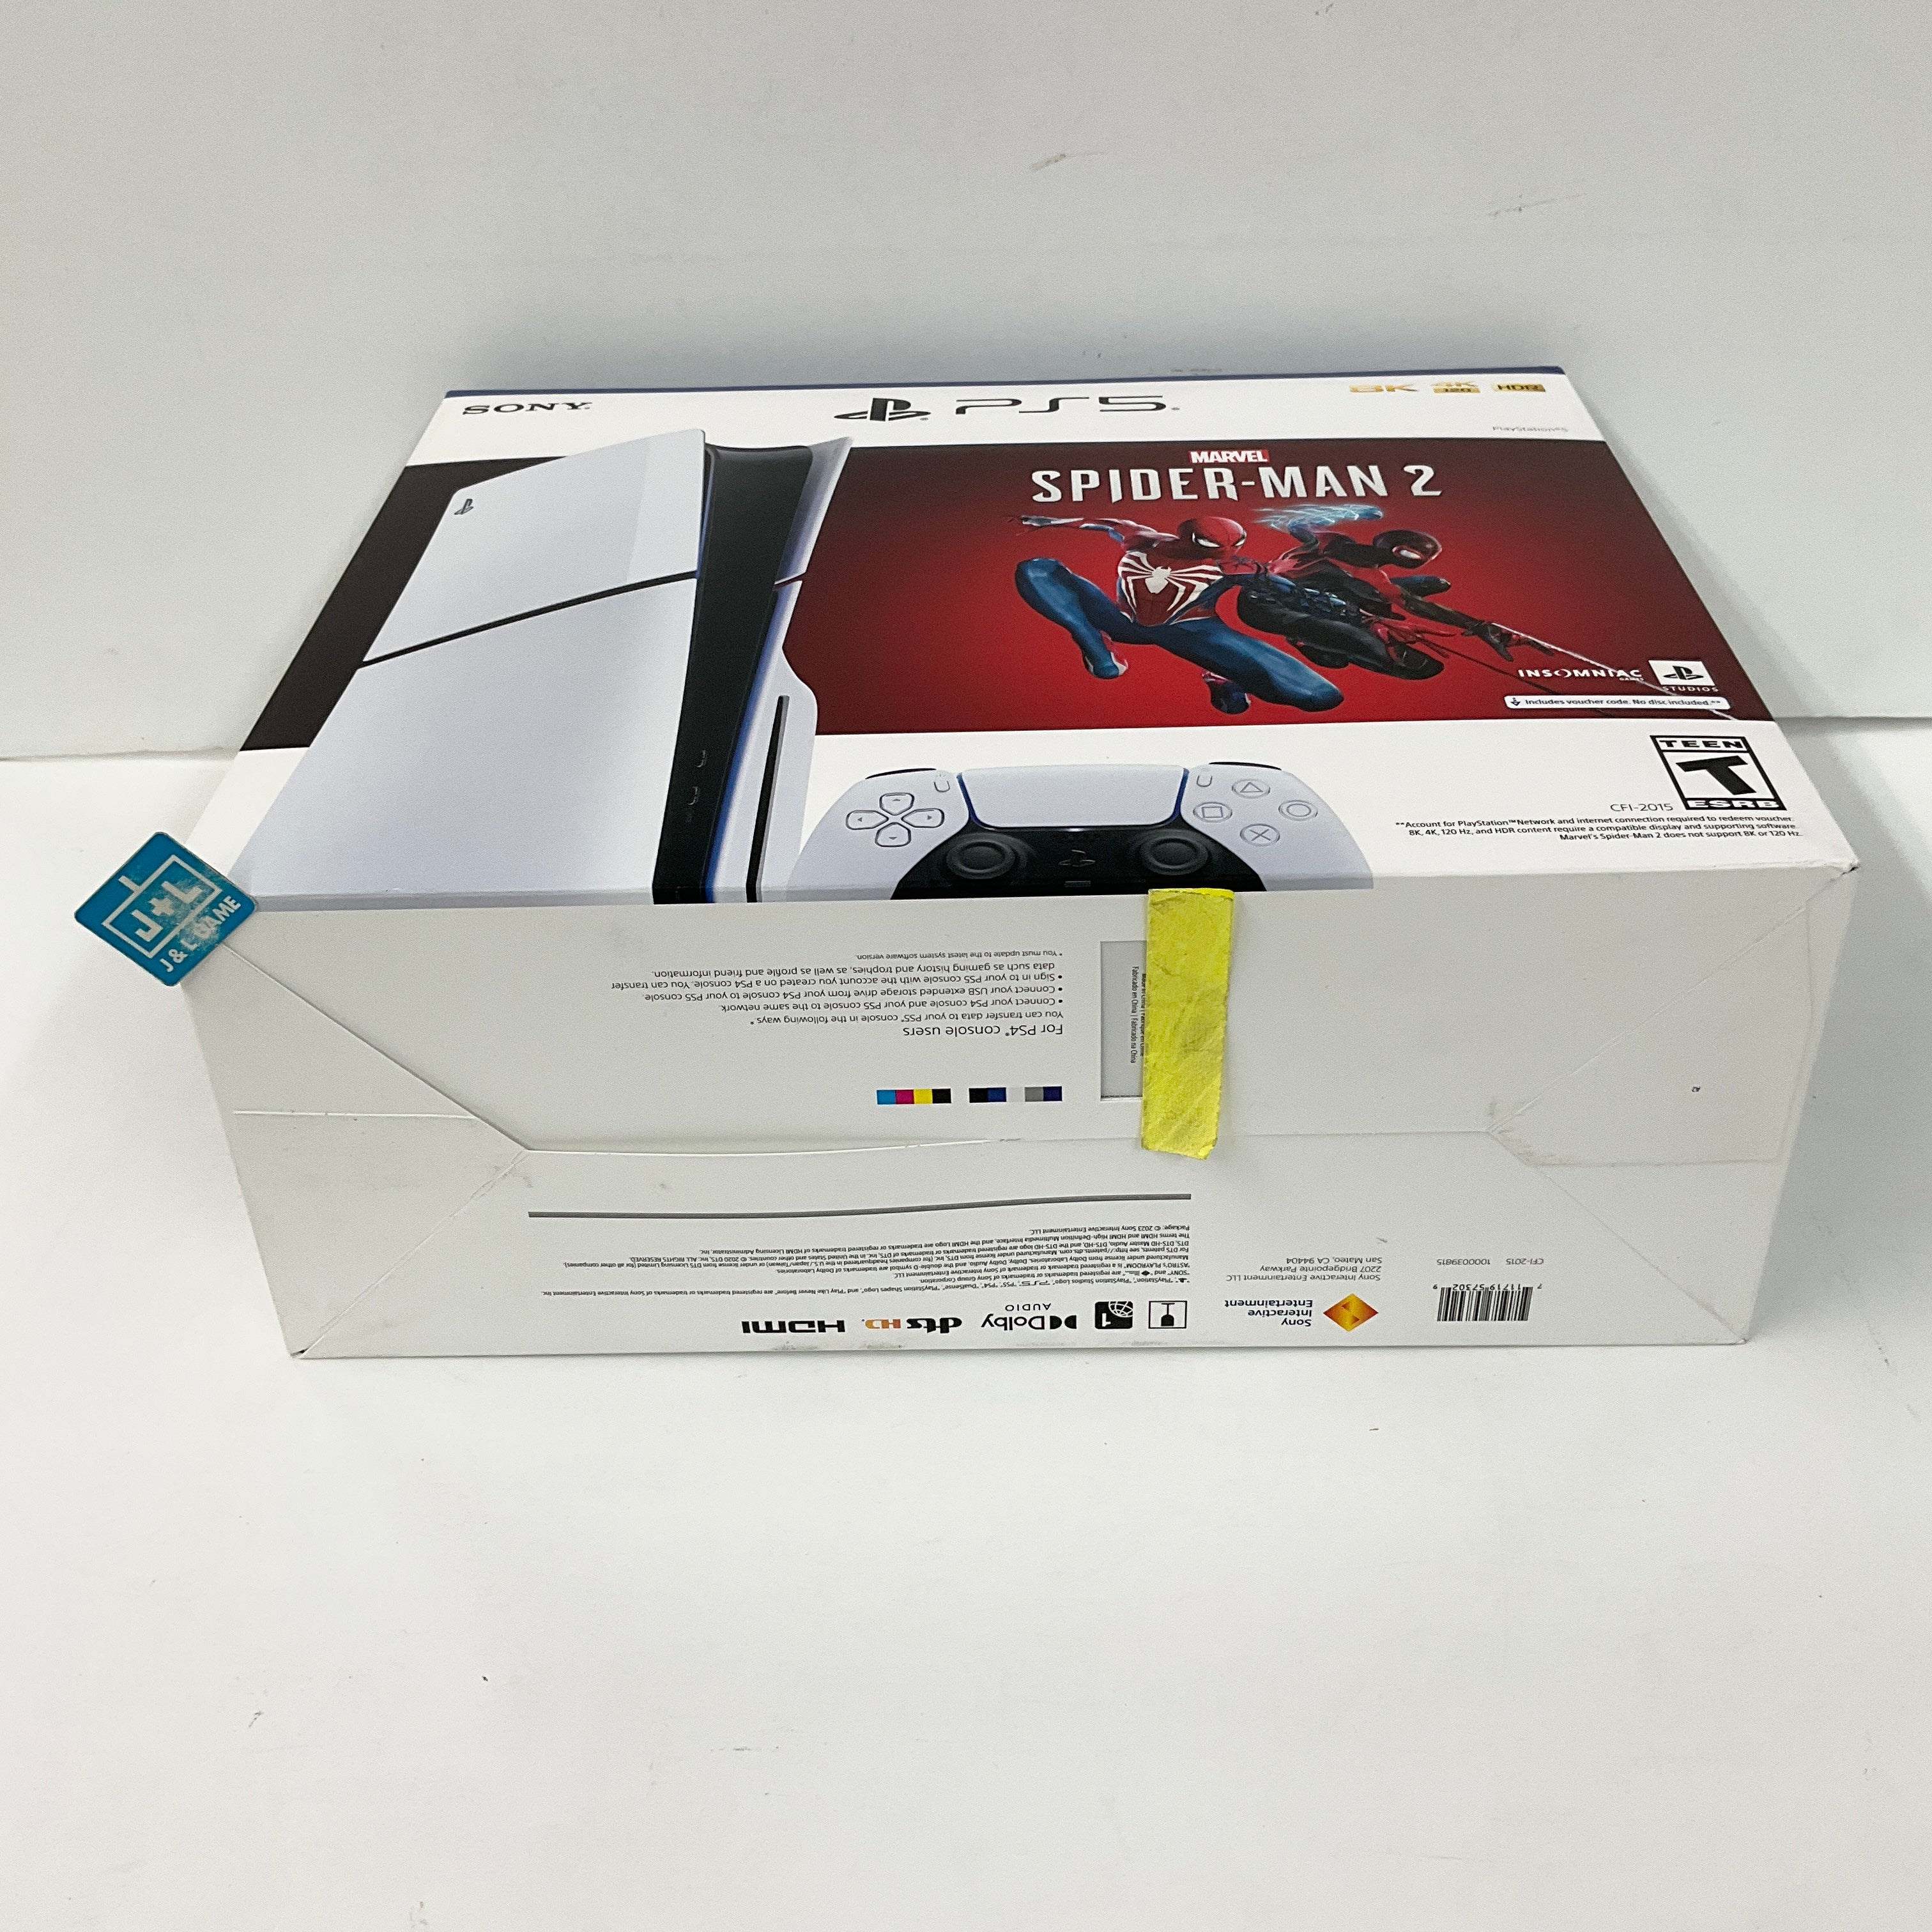 SONY PlayStation 5 Slim Disc Edition Console (Marvel’s Spider-Man 2 Bundle) - (PS5) Playstation 5 Consoles Sony   